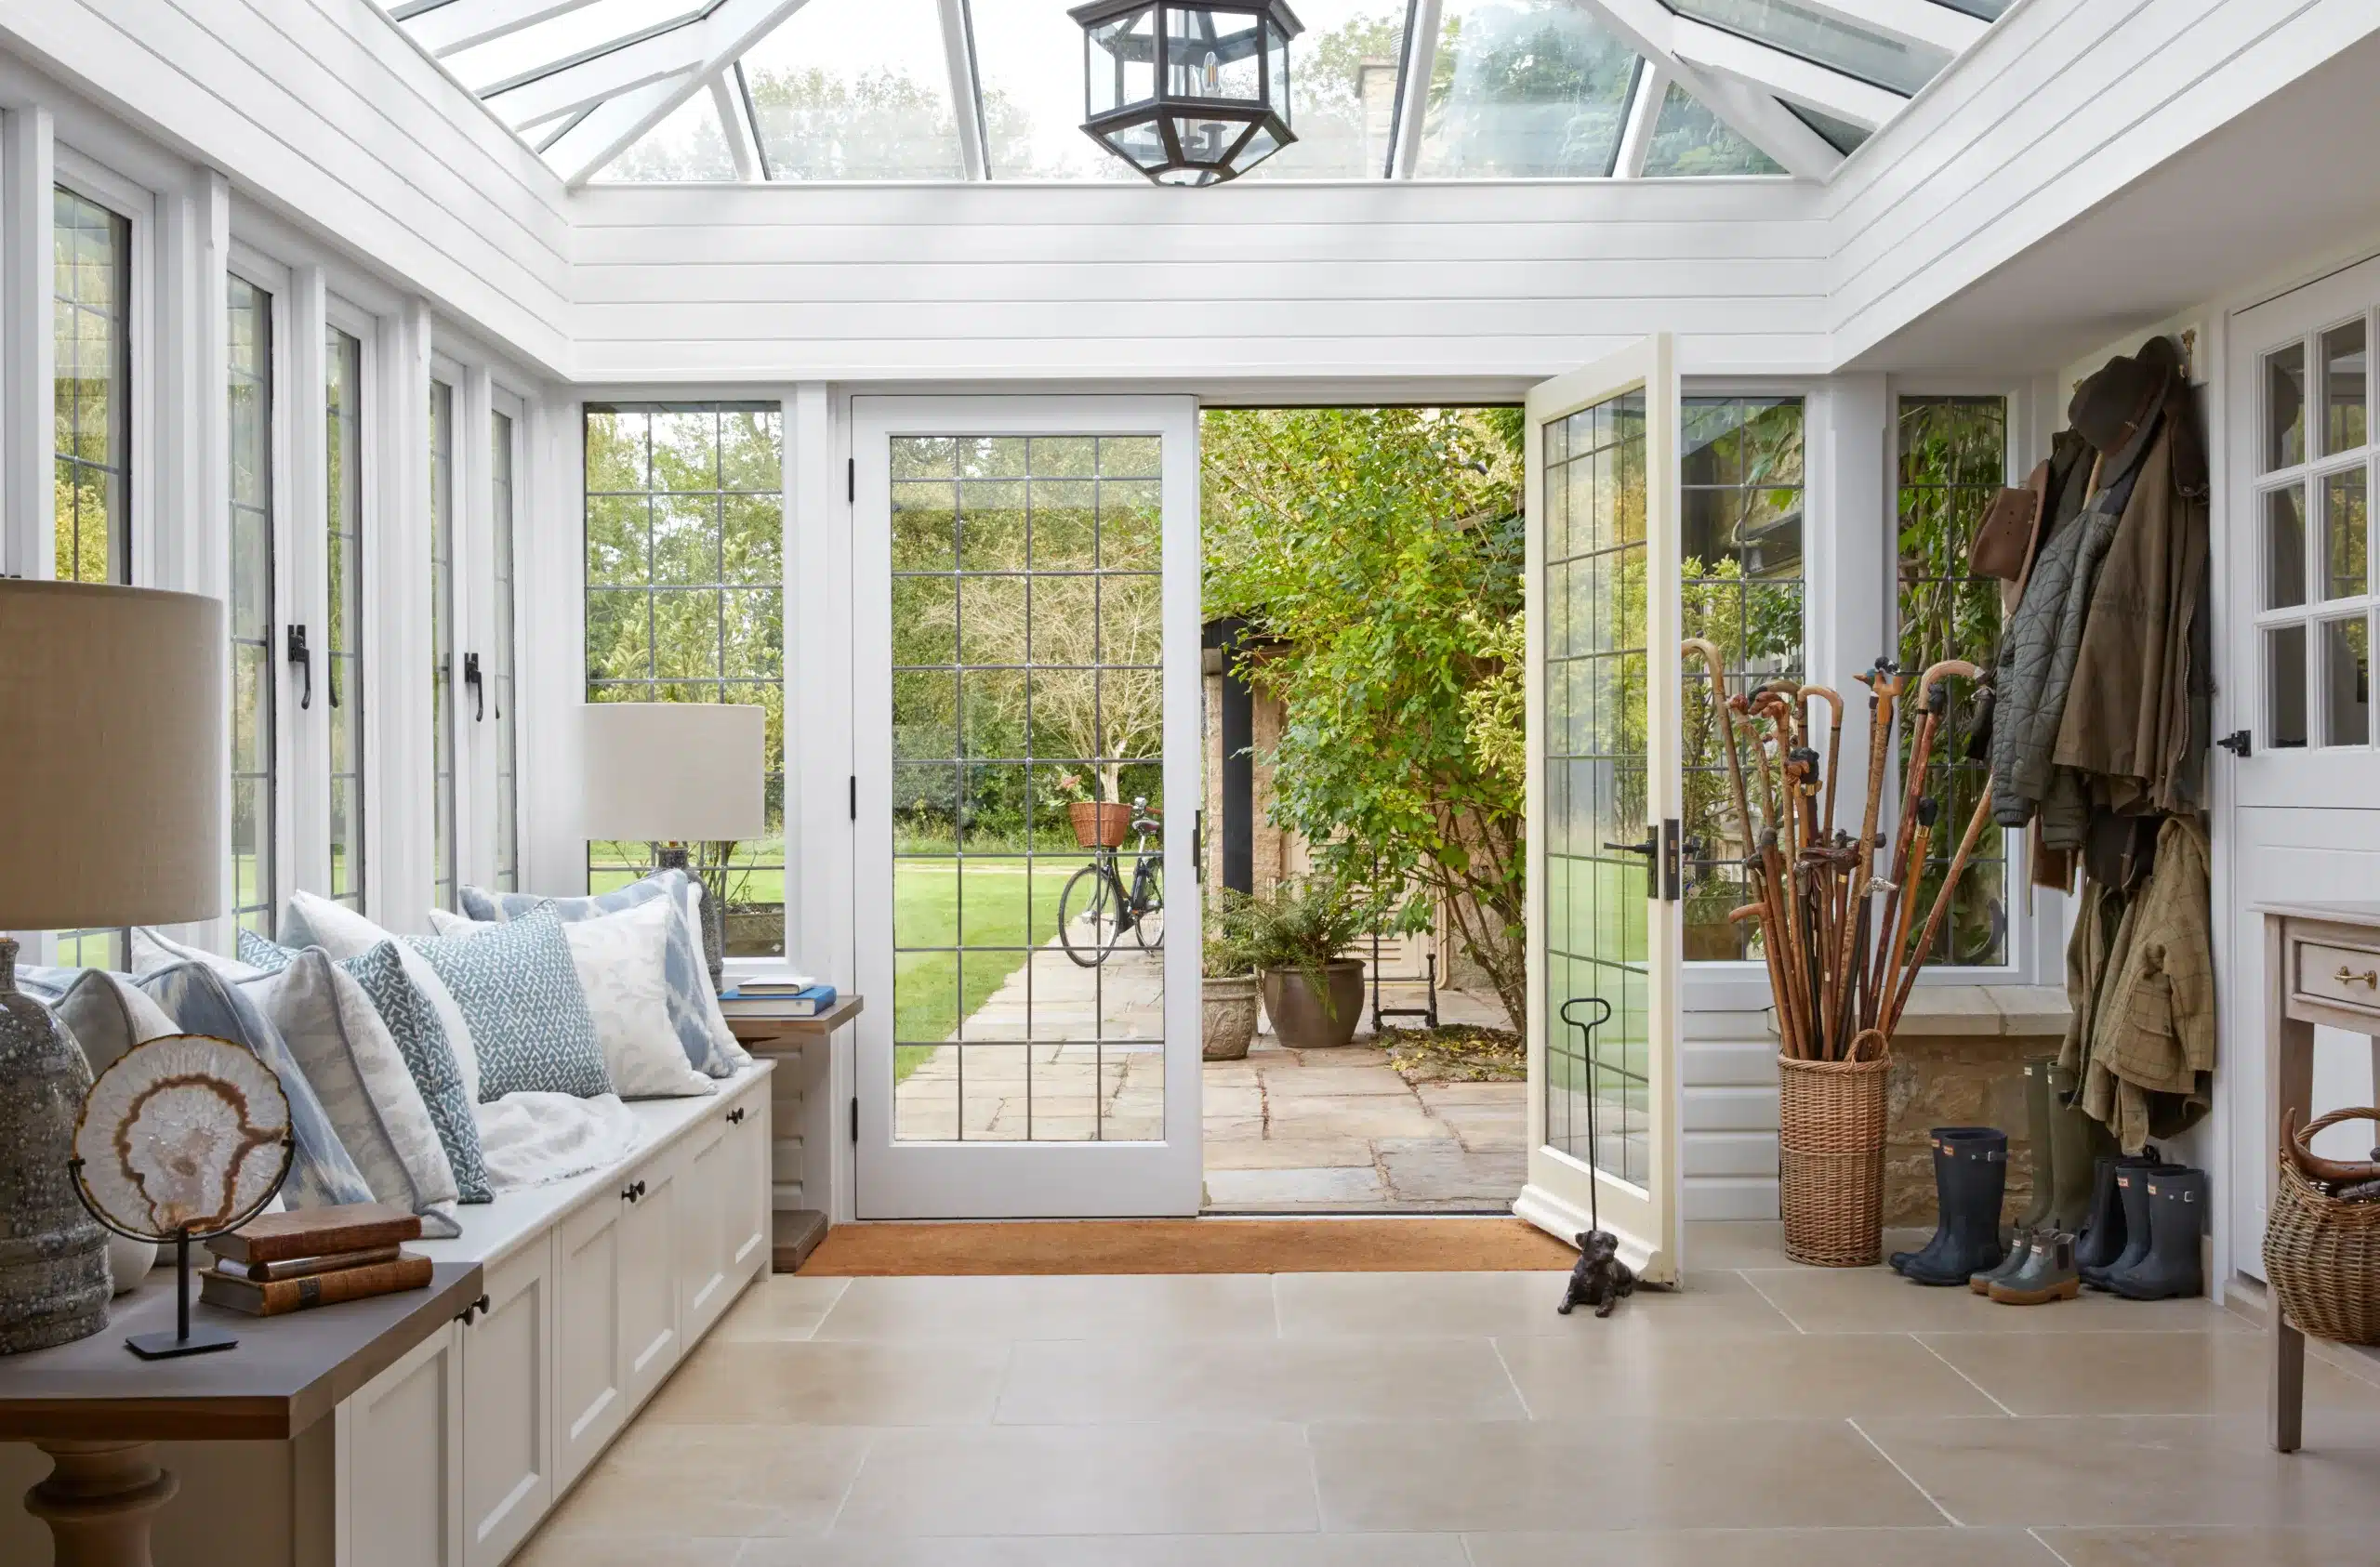 A conservatory in a converted mill house, a project from the UK's best interior designer Katharine Pooley